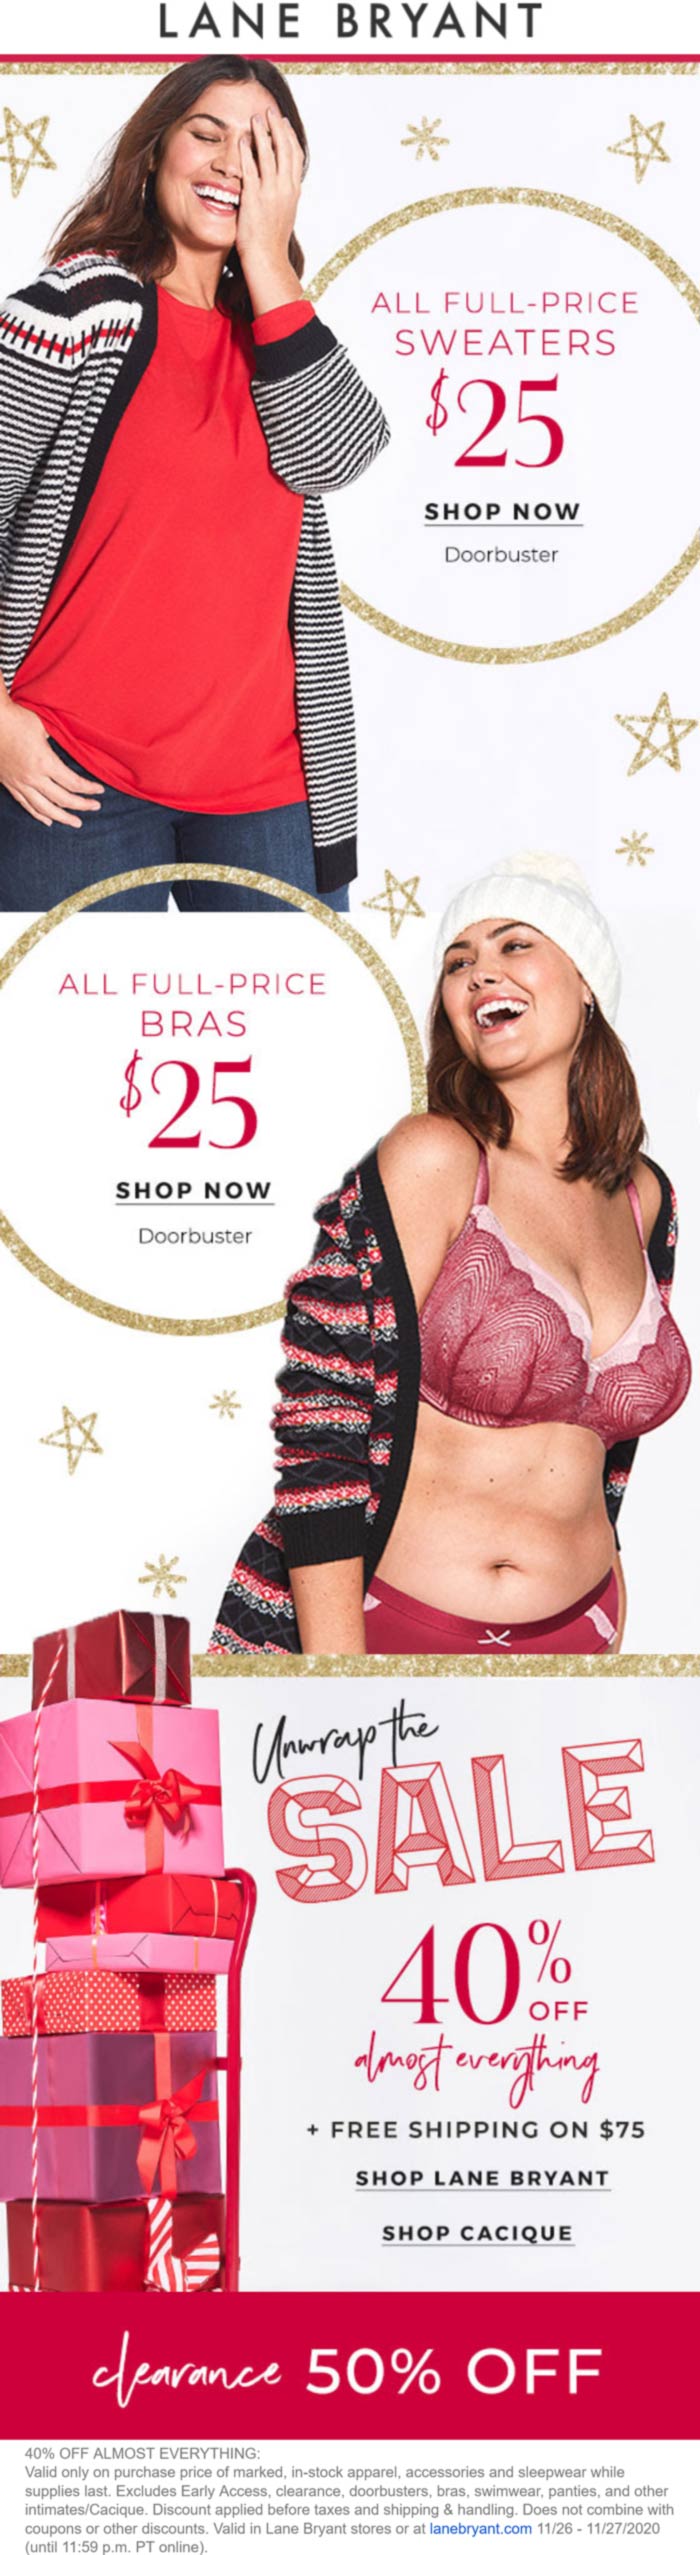 40 off today at Lane Bryant, ditto online lanebryant The Coupons App®